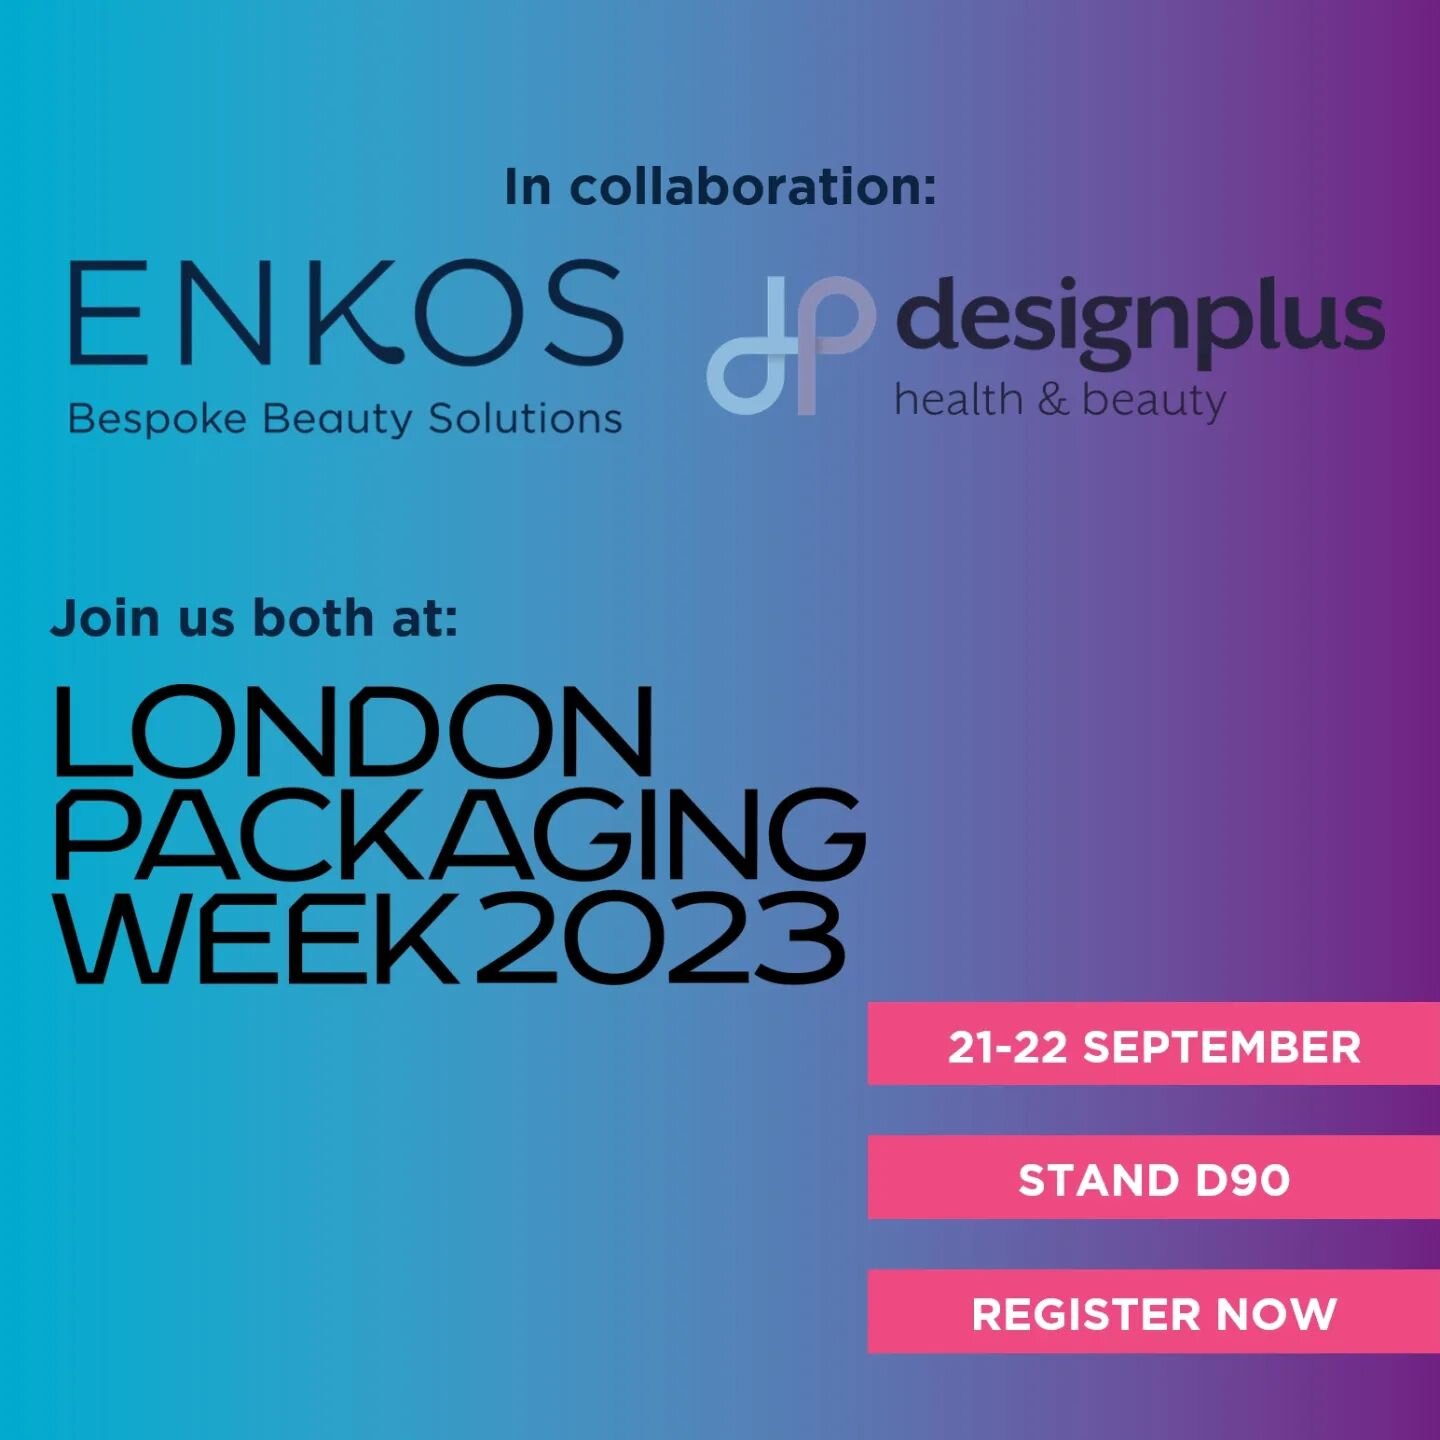 We are coming to London Packaging Week 2023! 🧴

Join us to experience our bespoke beauty solutions, from concept to delivery, in collaboration with Design Plus Health &amp; Beauty Ltd.

Key information:
- Dates: 21st and 22nd September 2023
- Venue: